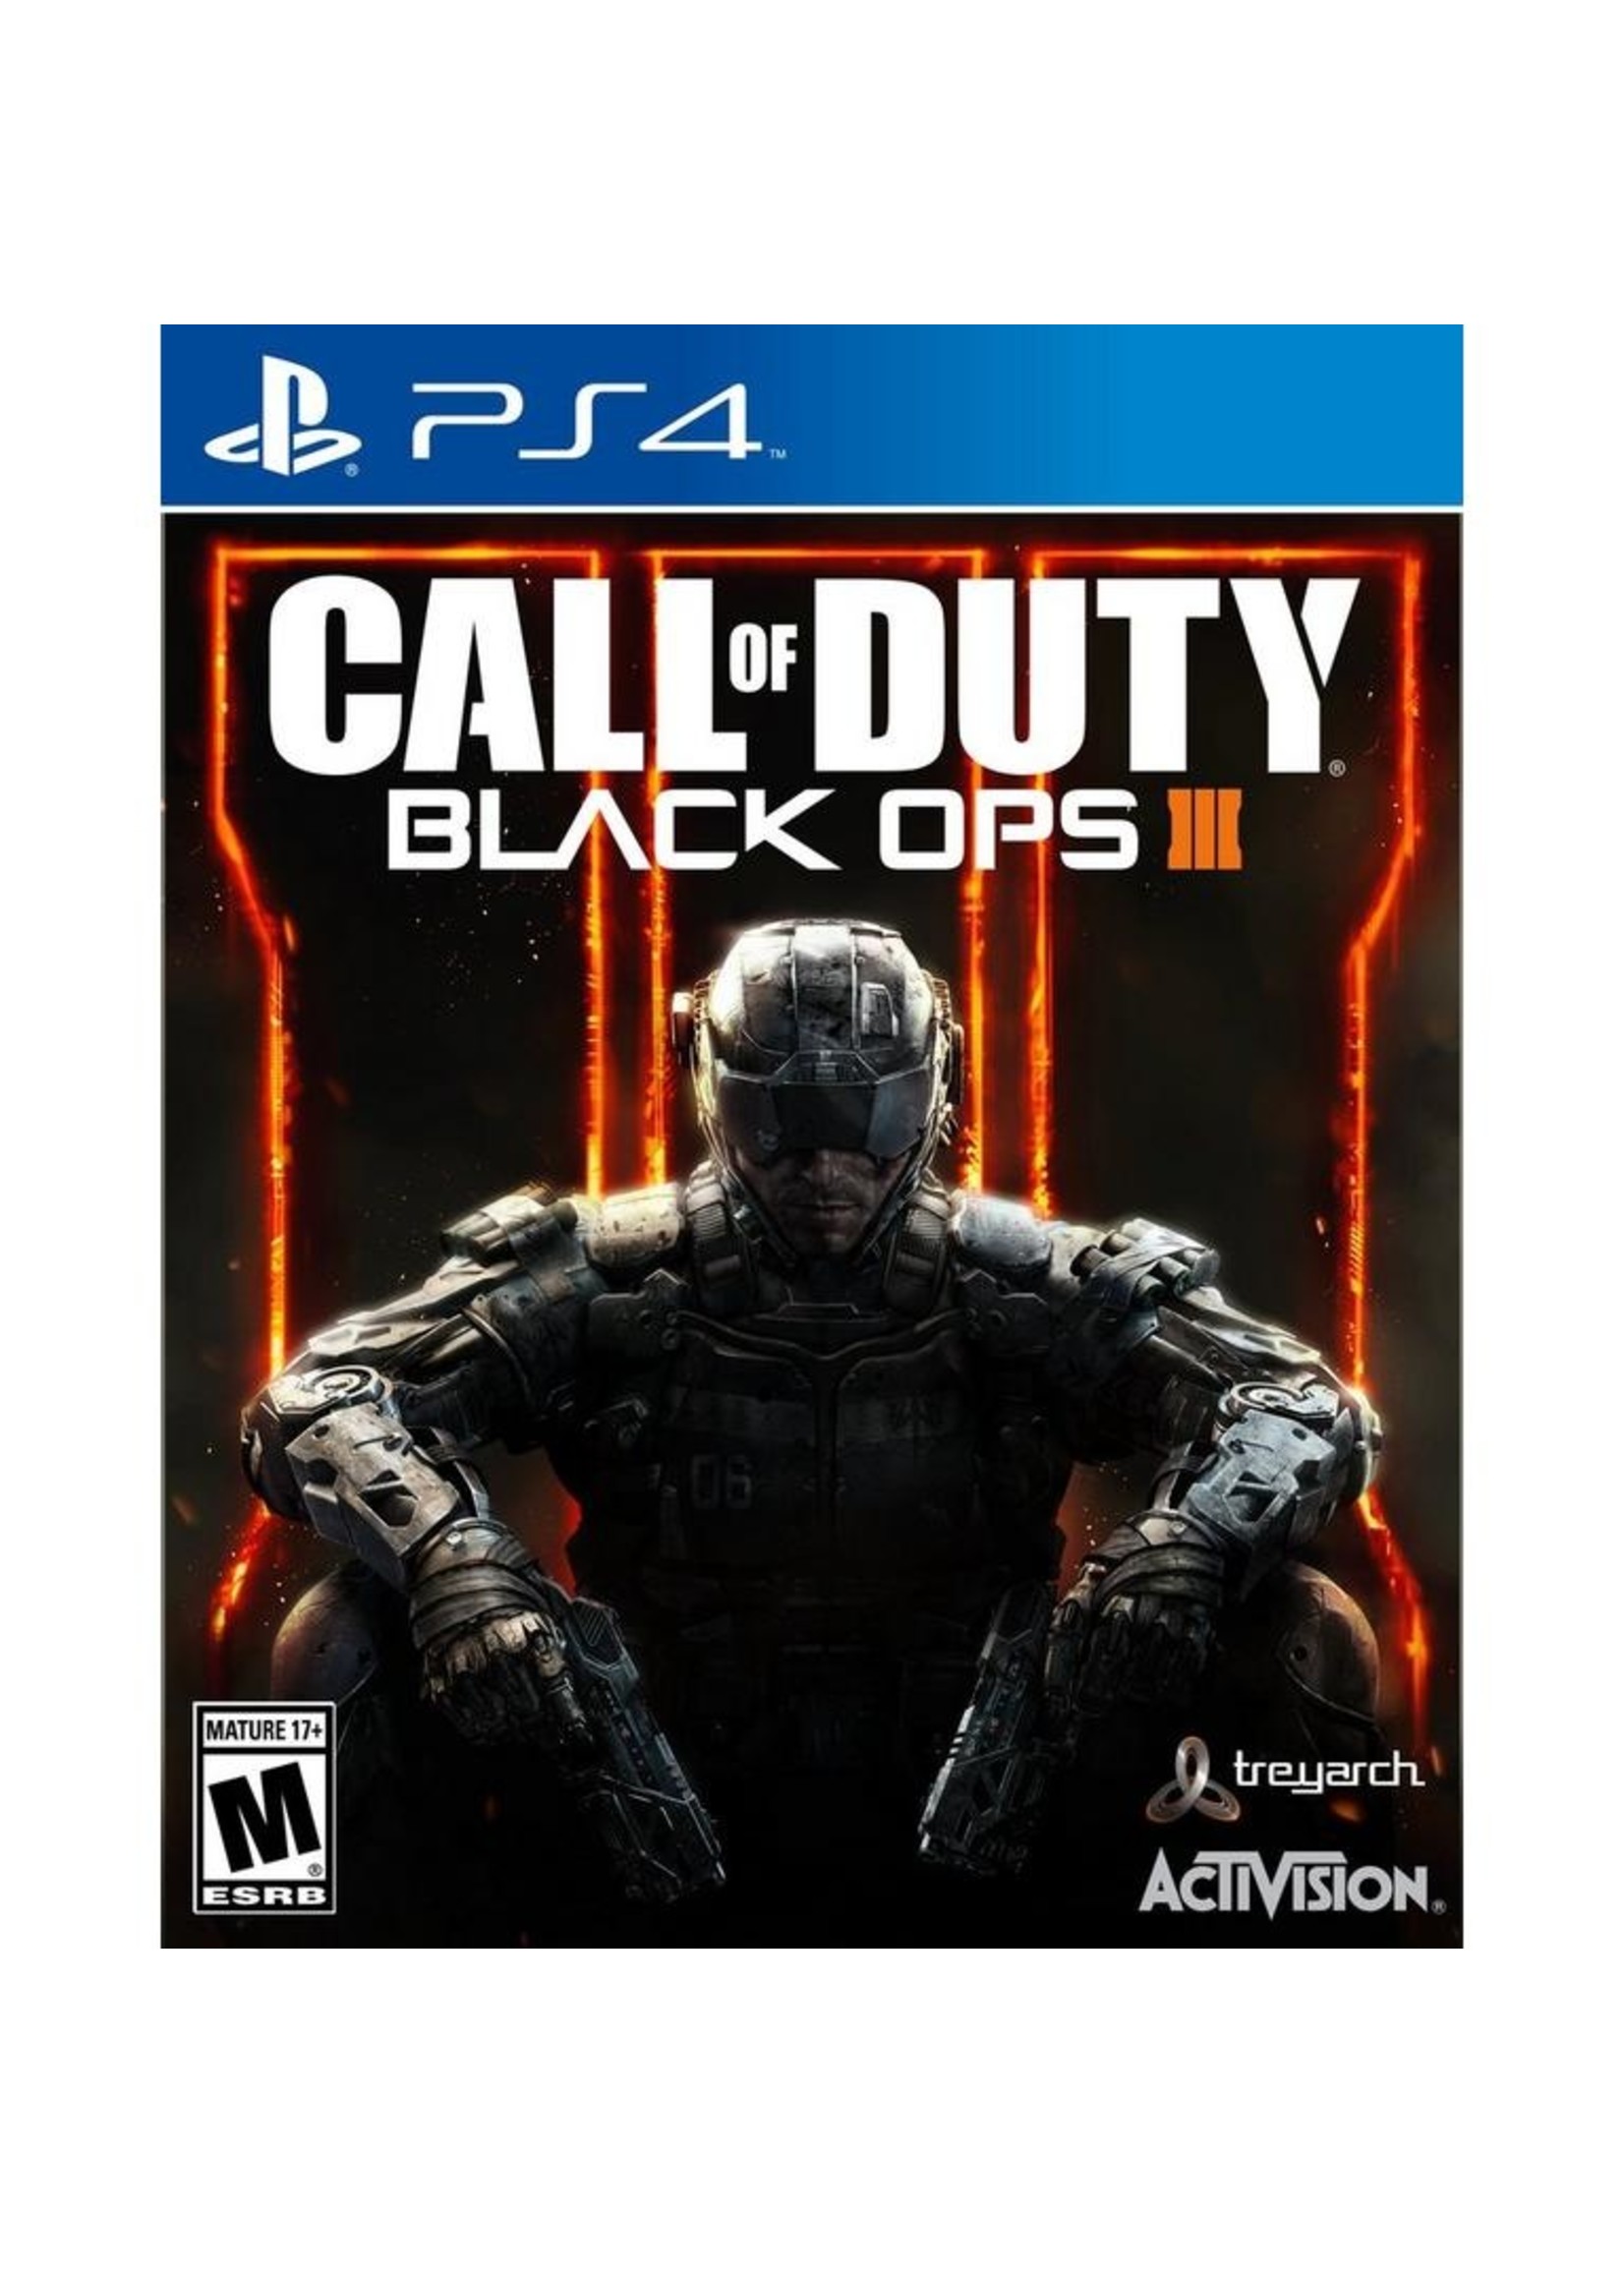 Call of Duty: Black Ops 3 - PS4 PrePlayed